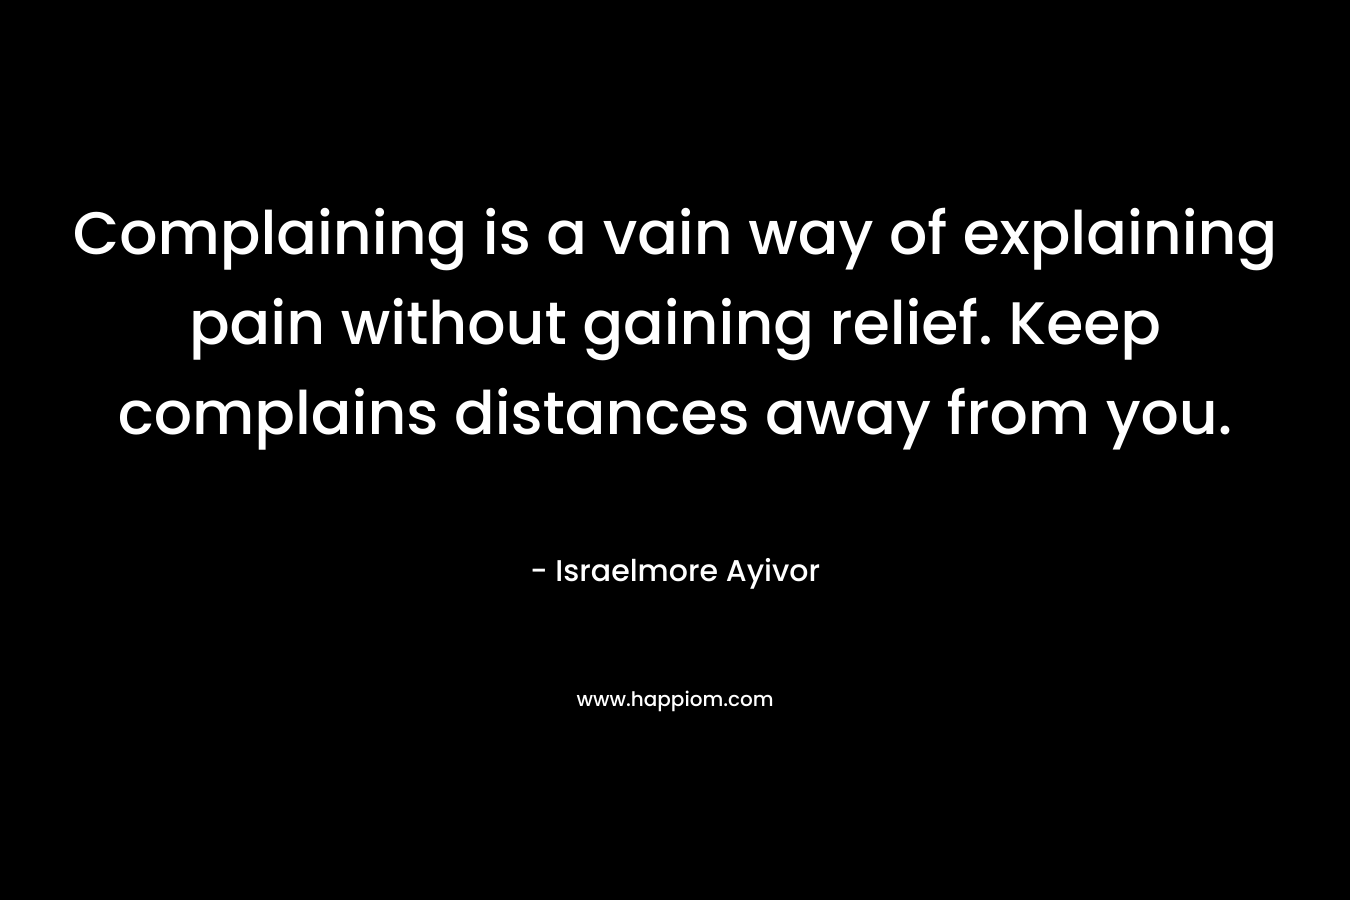 Complaining is a vain way of explaining pain without gaining relief. Keep complains distances away from you. – Israelmore Ayivor